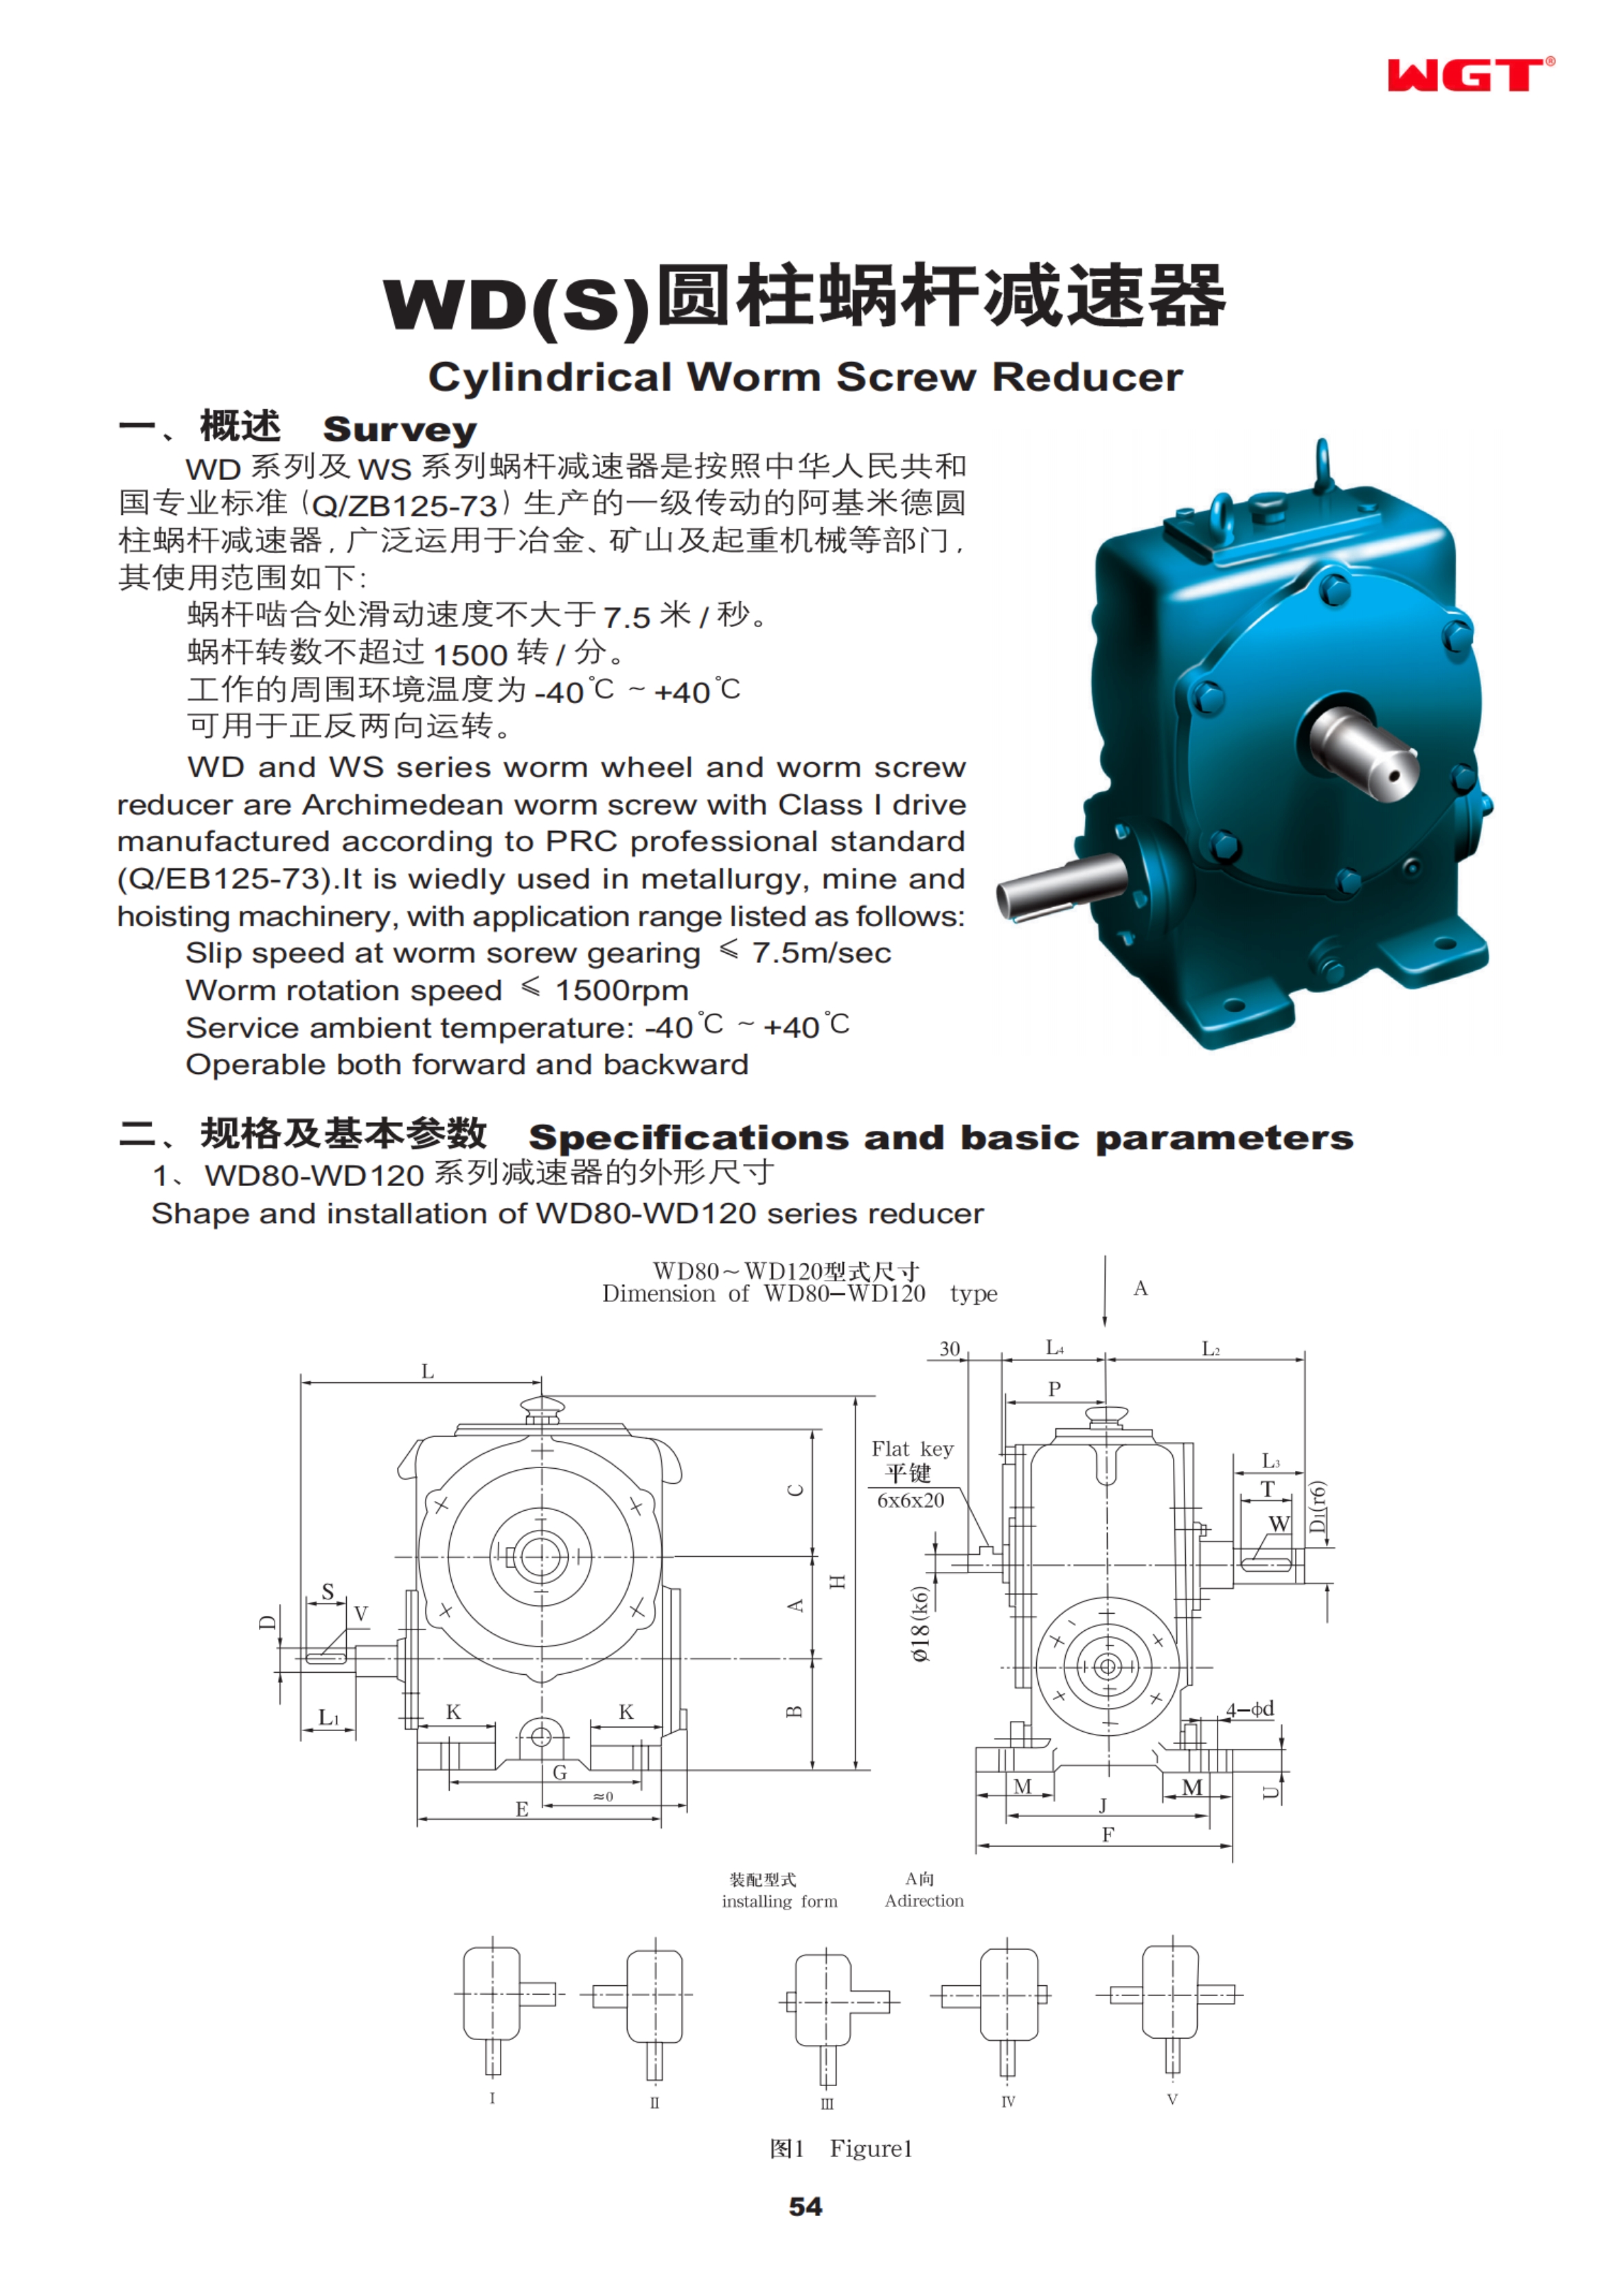 WD210 cylindrical worm reducer WGT